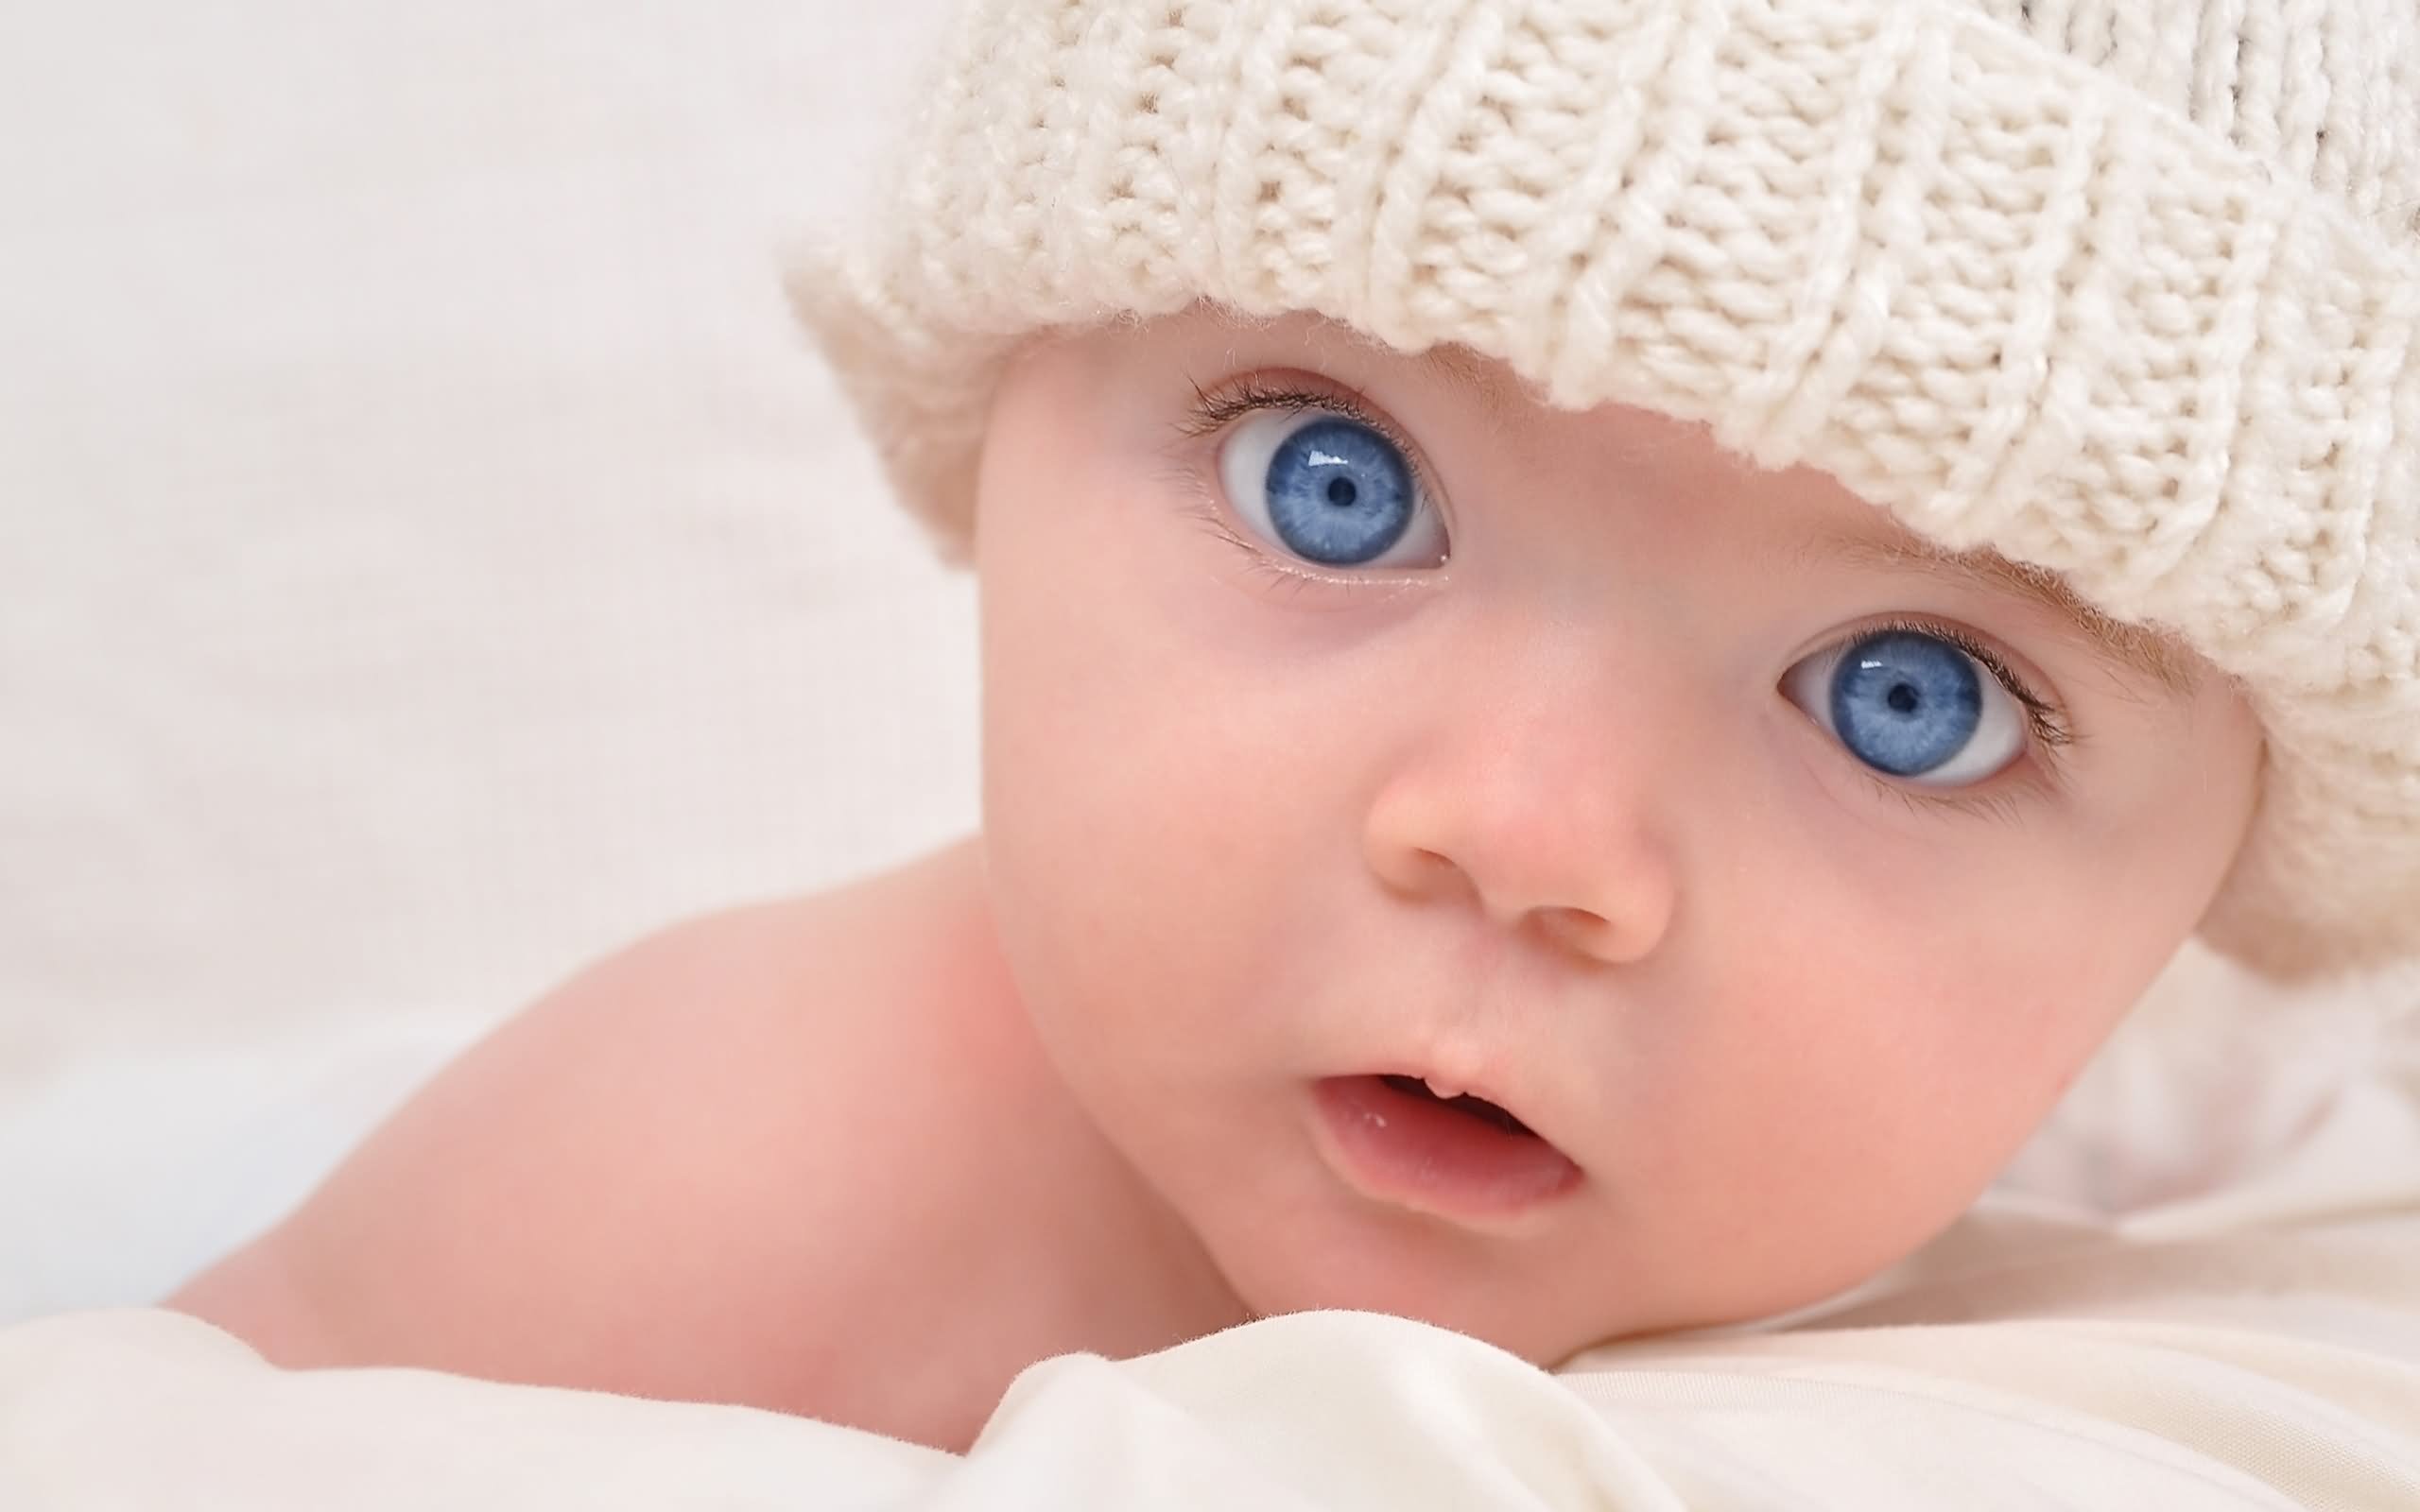 1. Baby girl with dark hair and blue eyes - wide 8